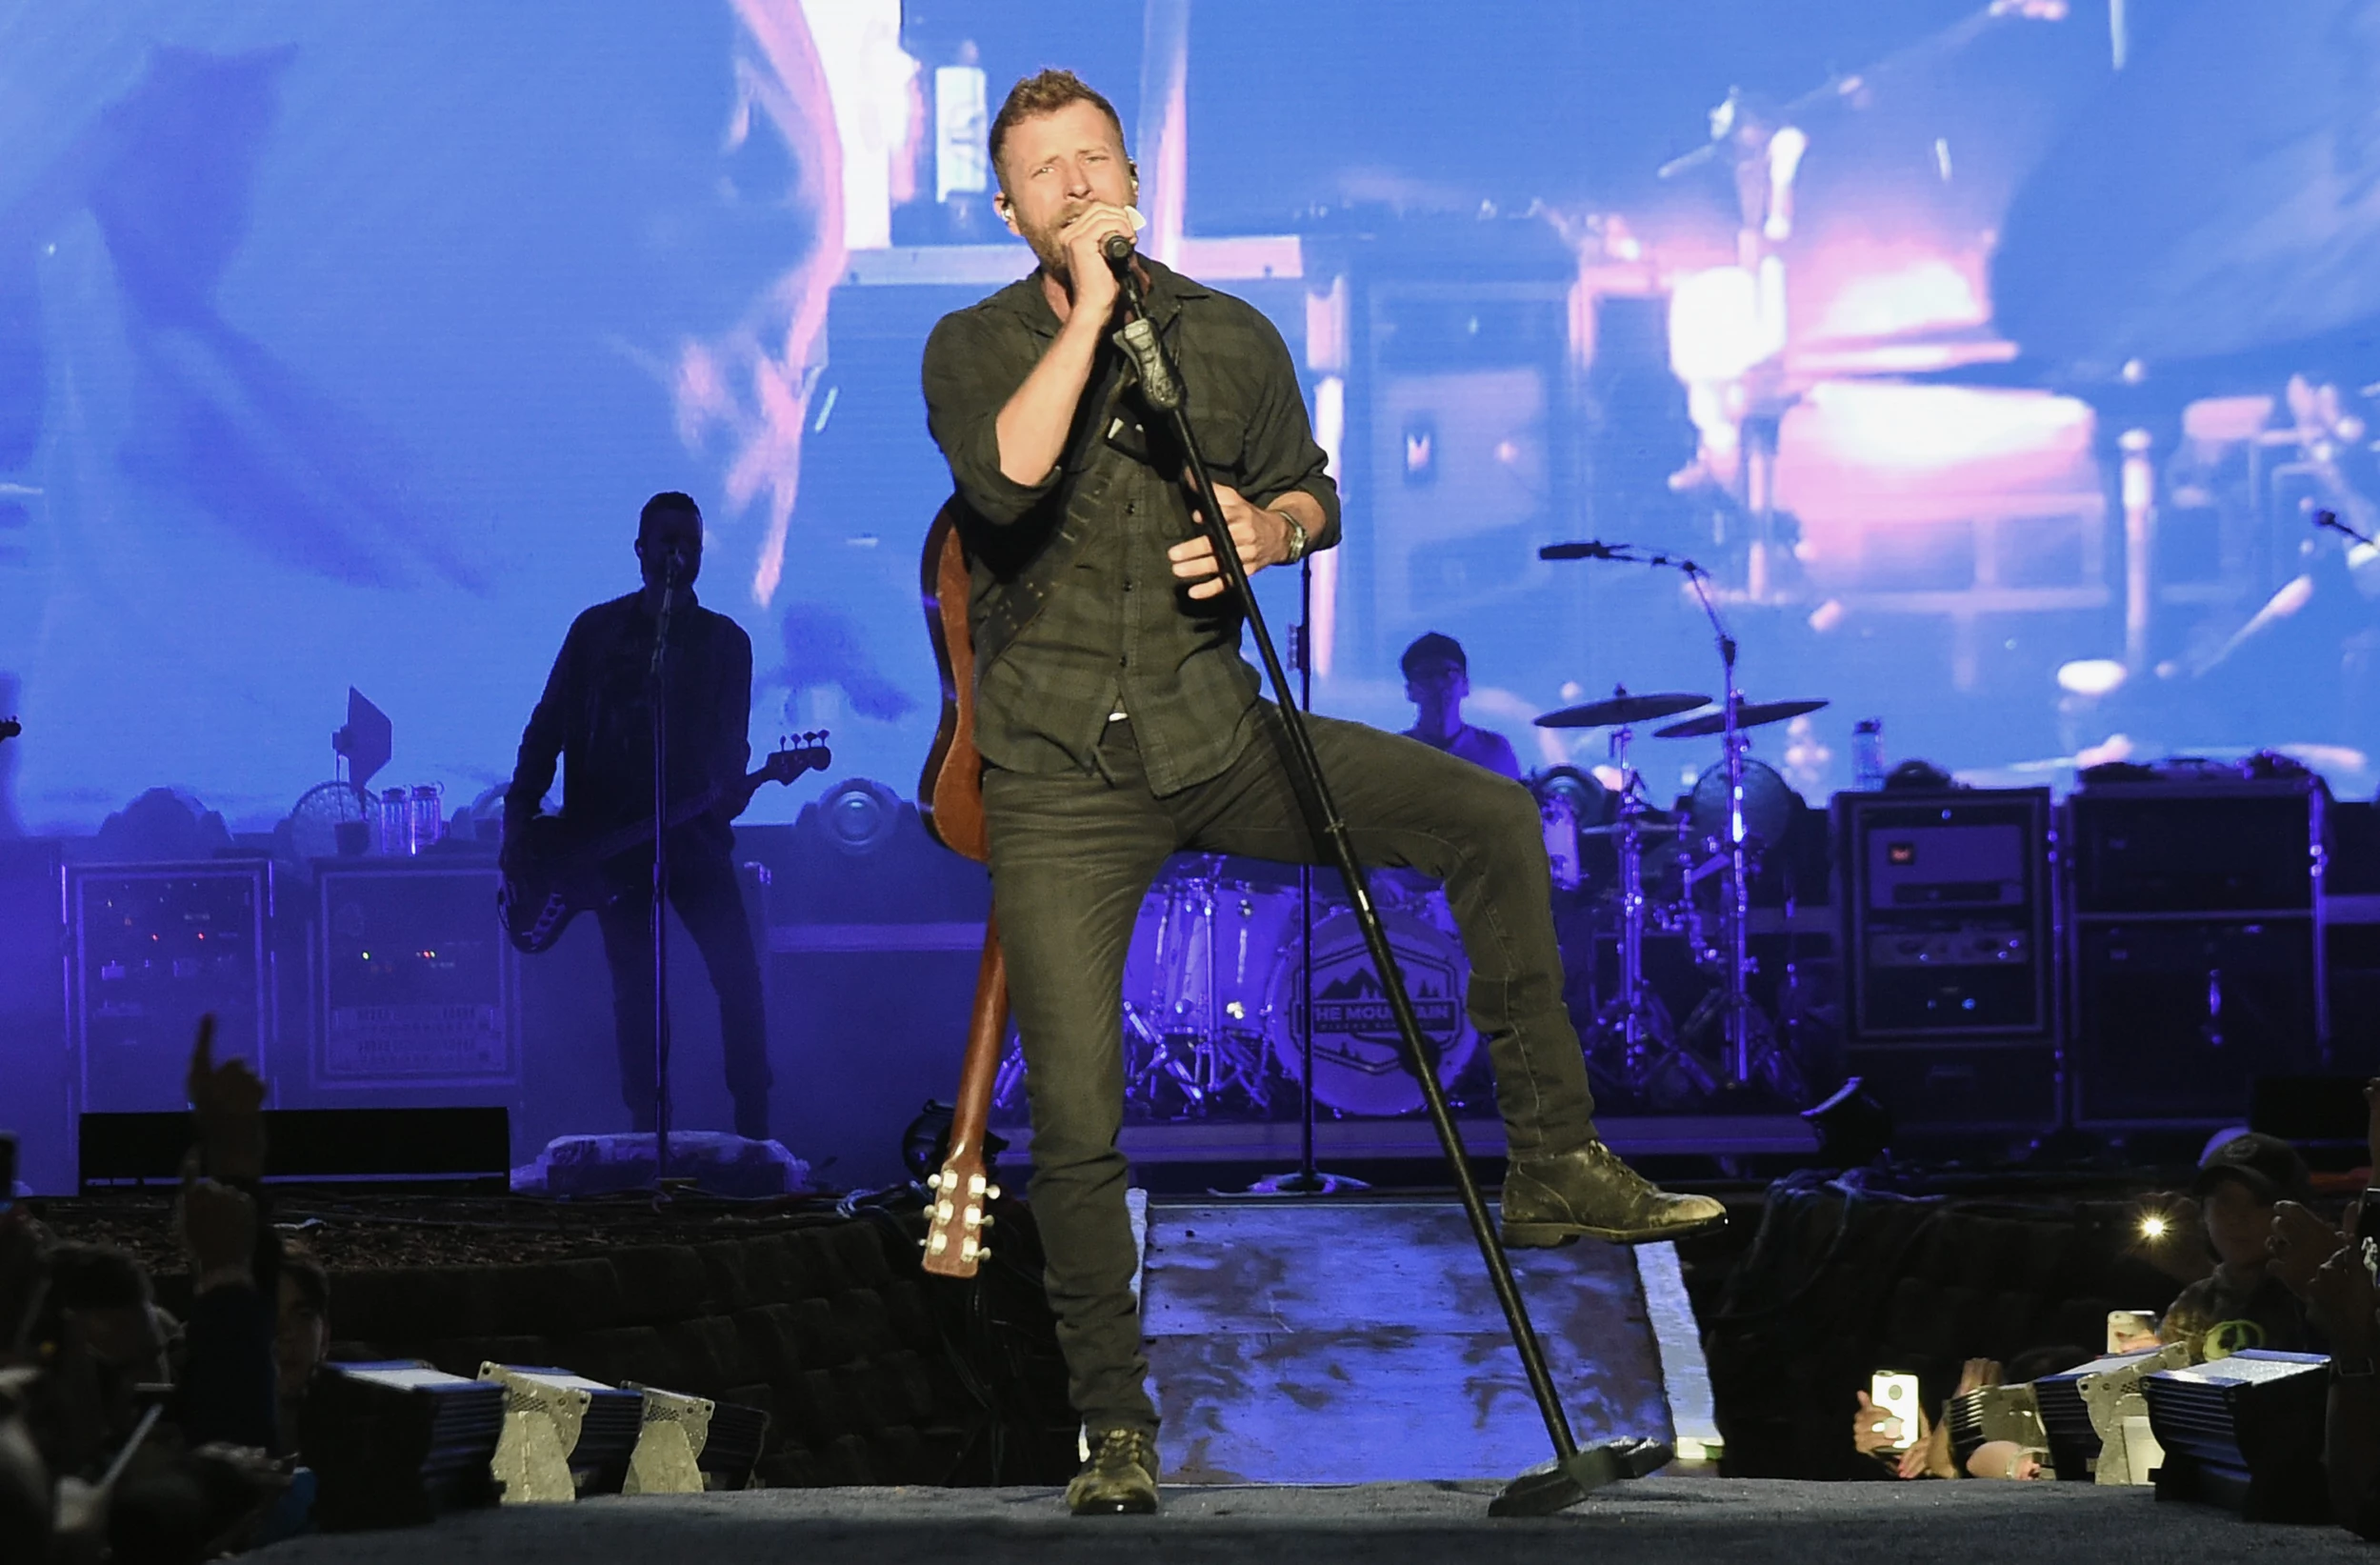 Dierks Bentley Bringing Burning Man Tour to Sioux Falls picture